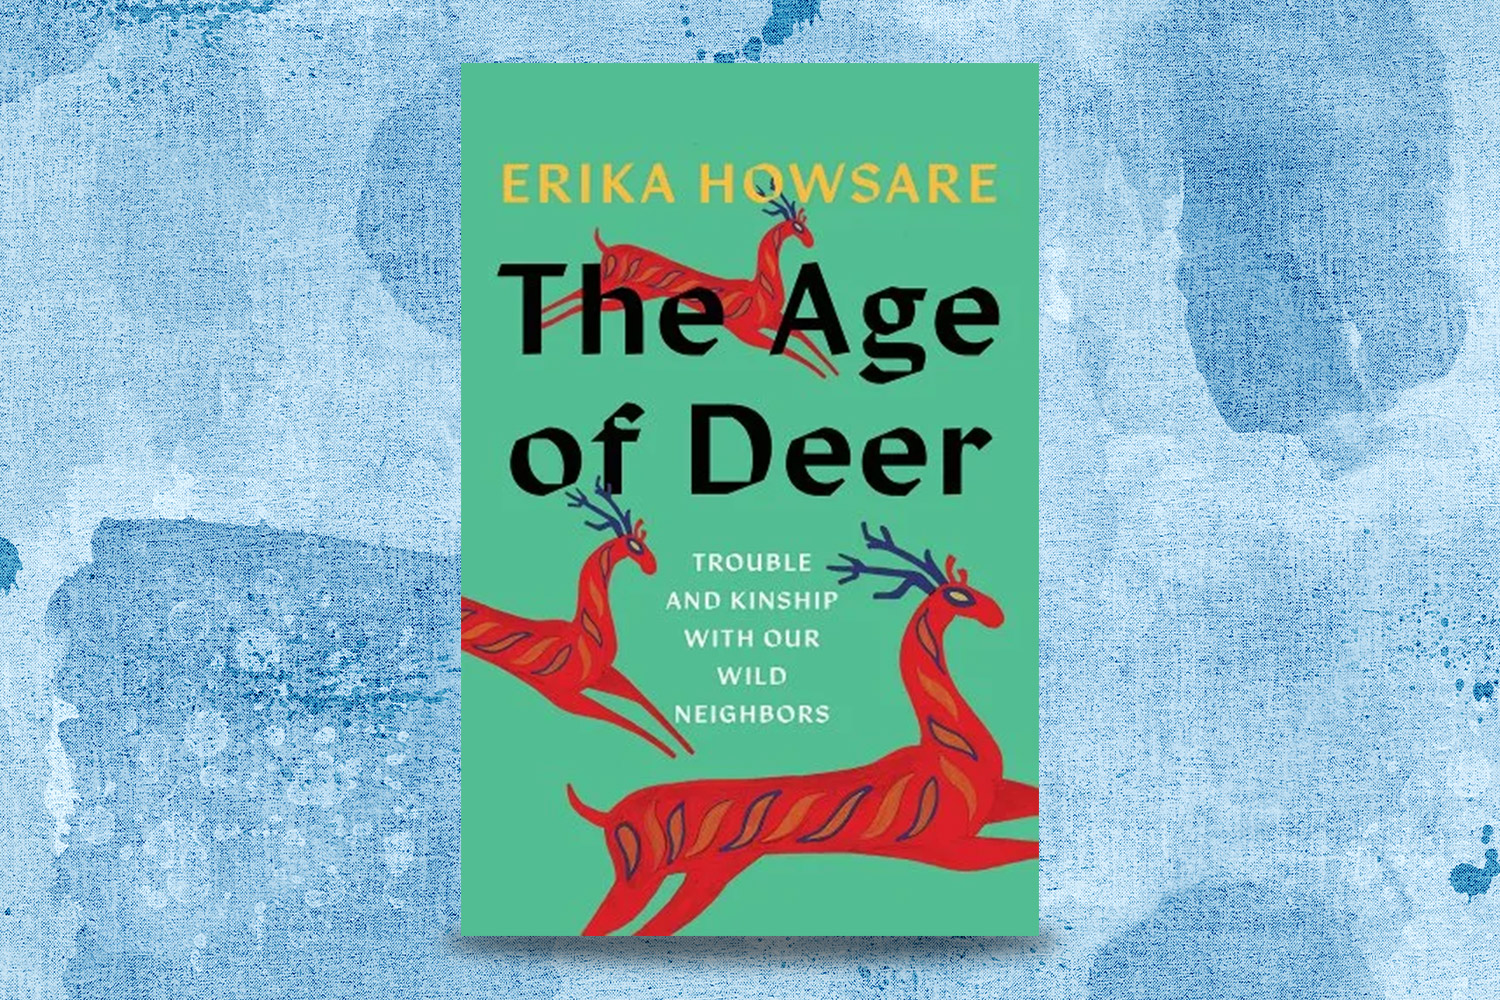 Erika Howsare, The Age of Deer: Trouble and Kinship with Our Wild Neighbors